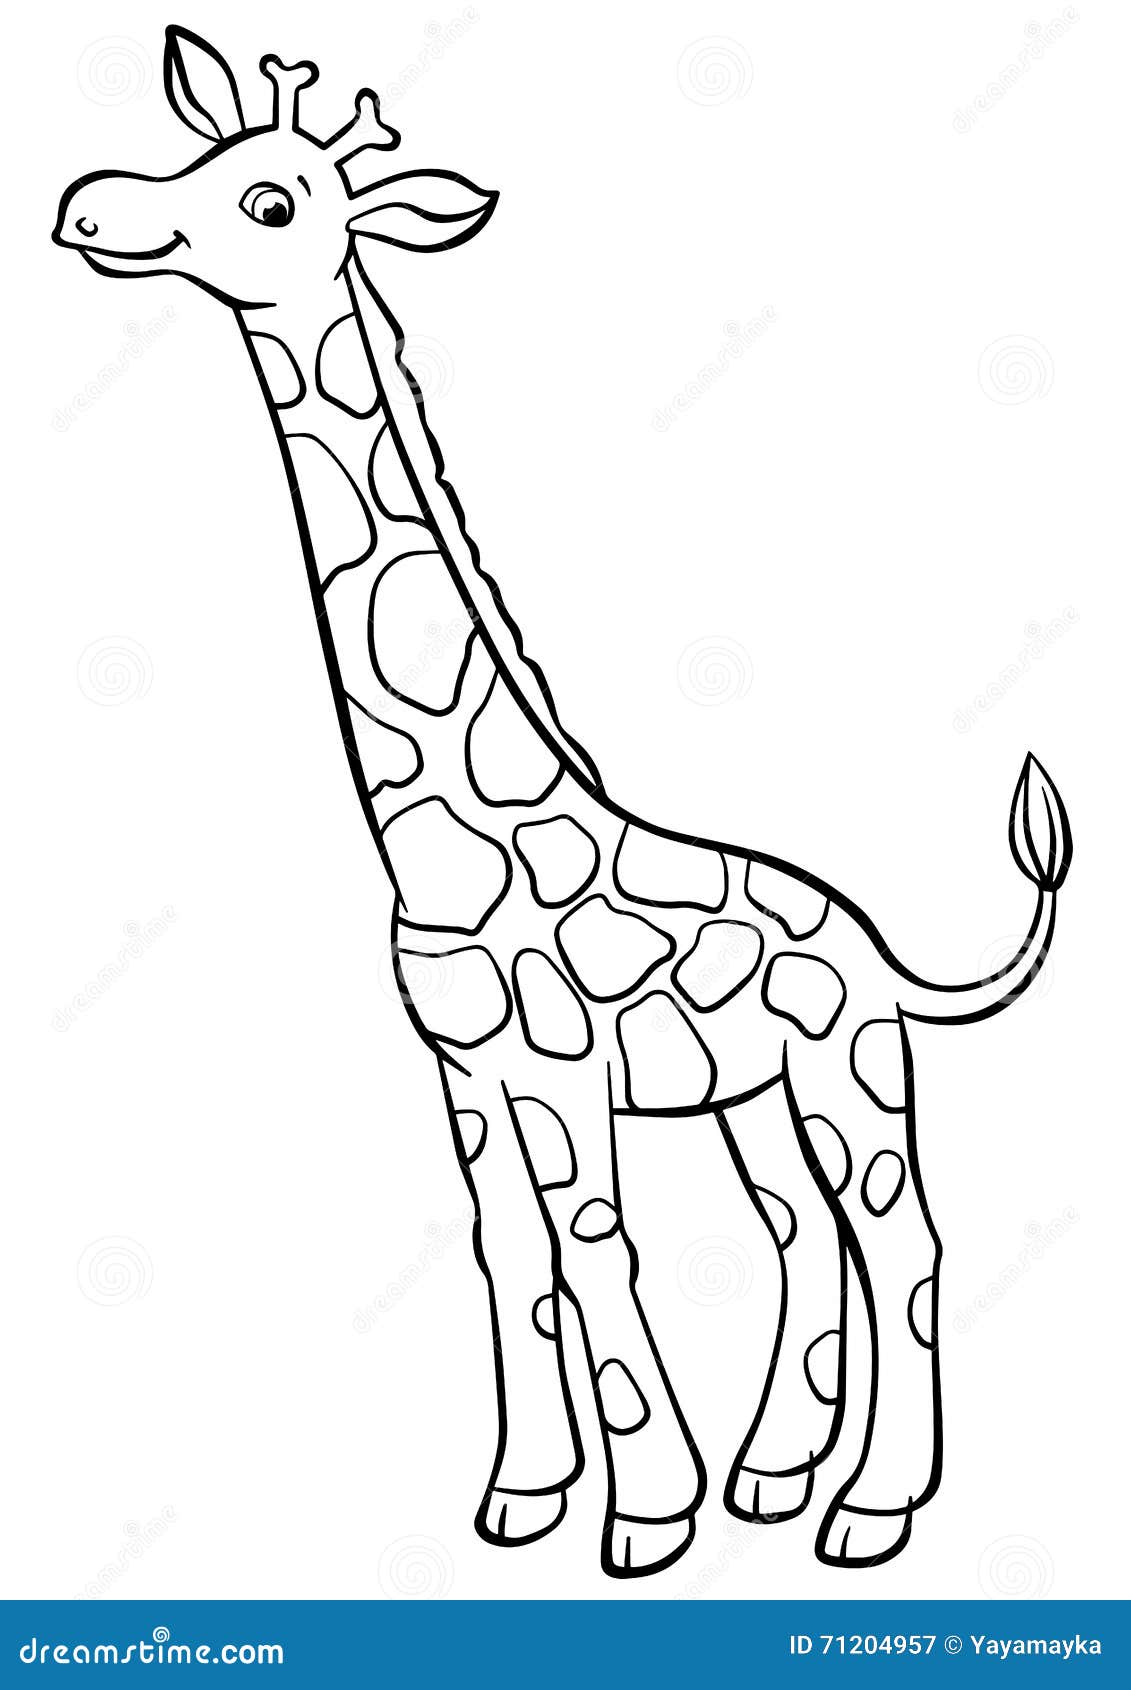 Giraffe colouring pages stock illustrations â giraffe colouring pages stock illustrations vectors clipart